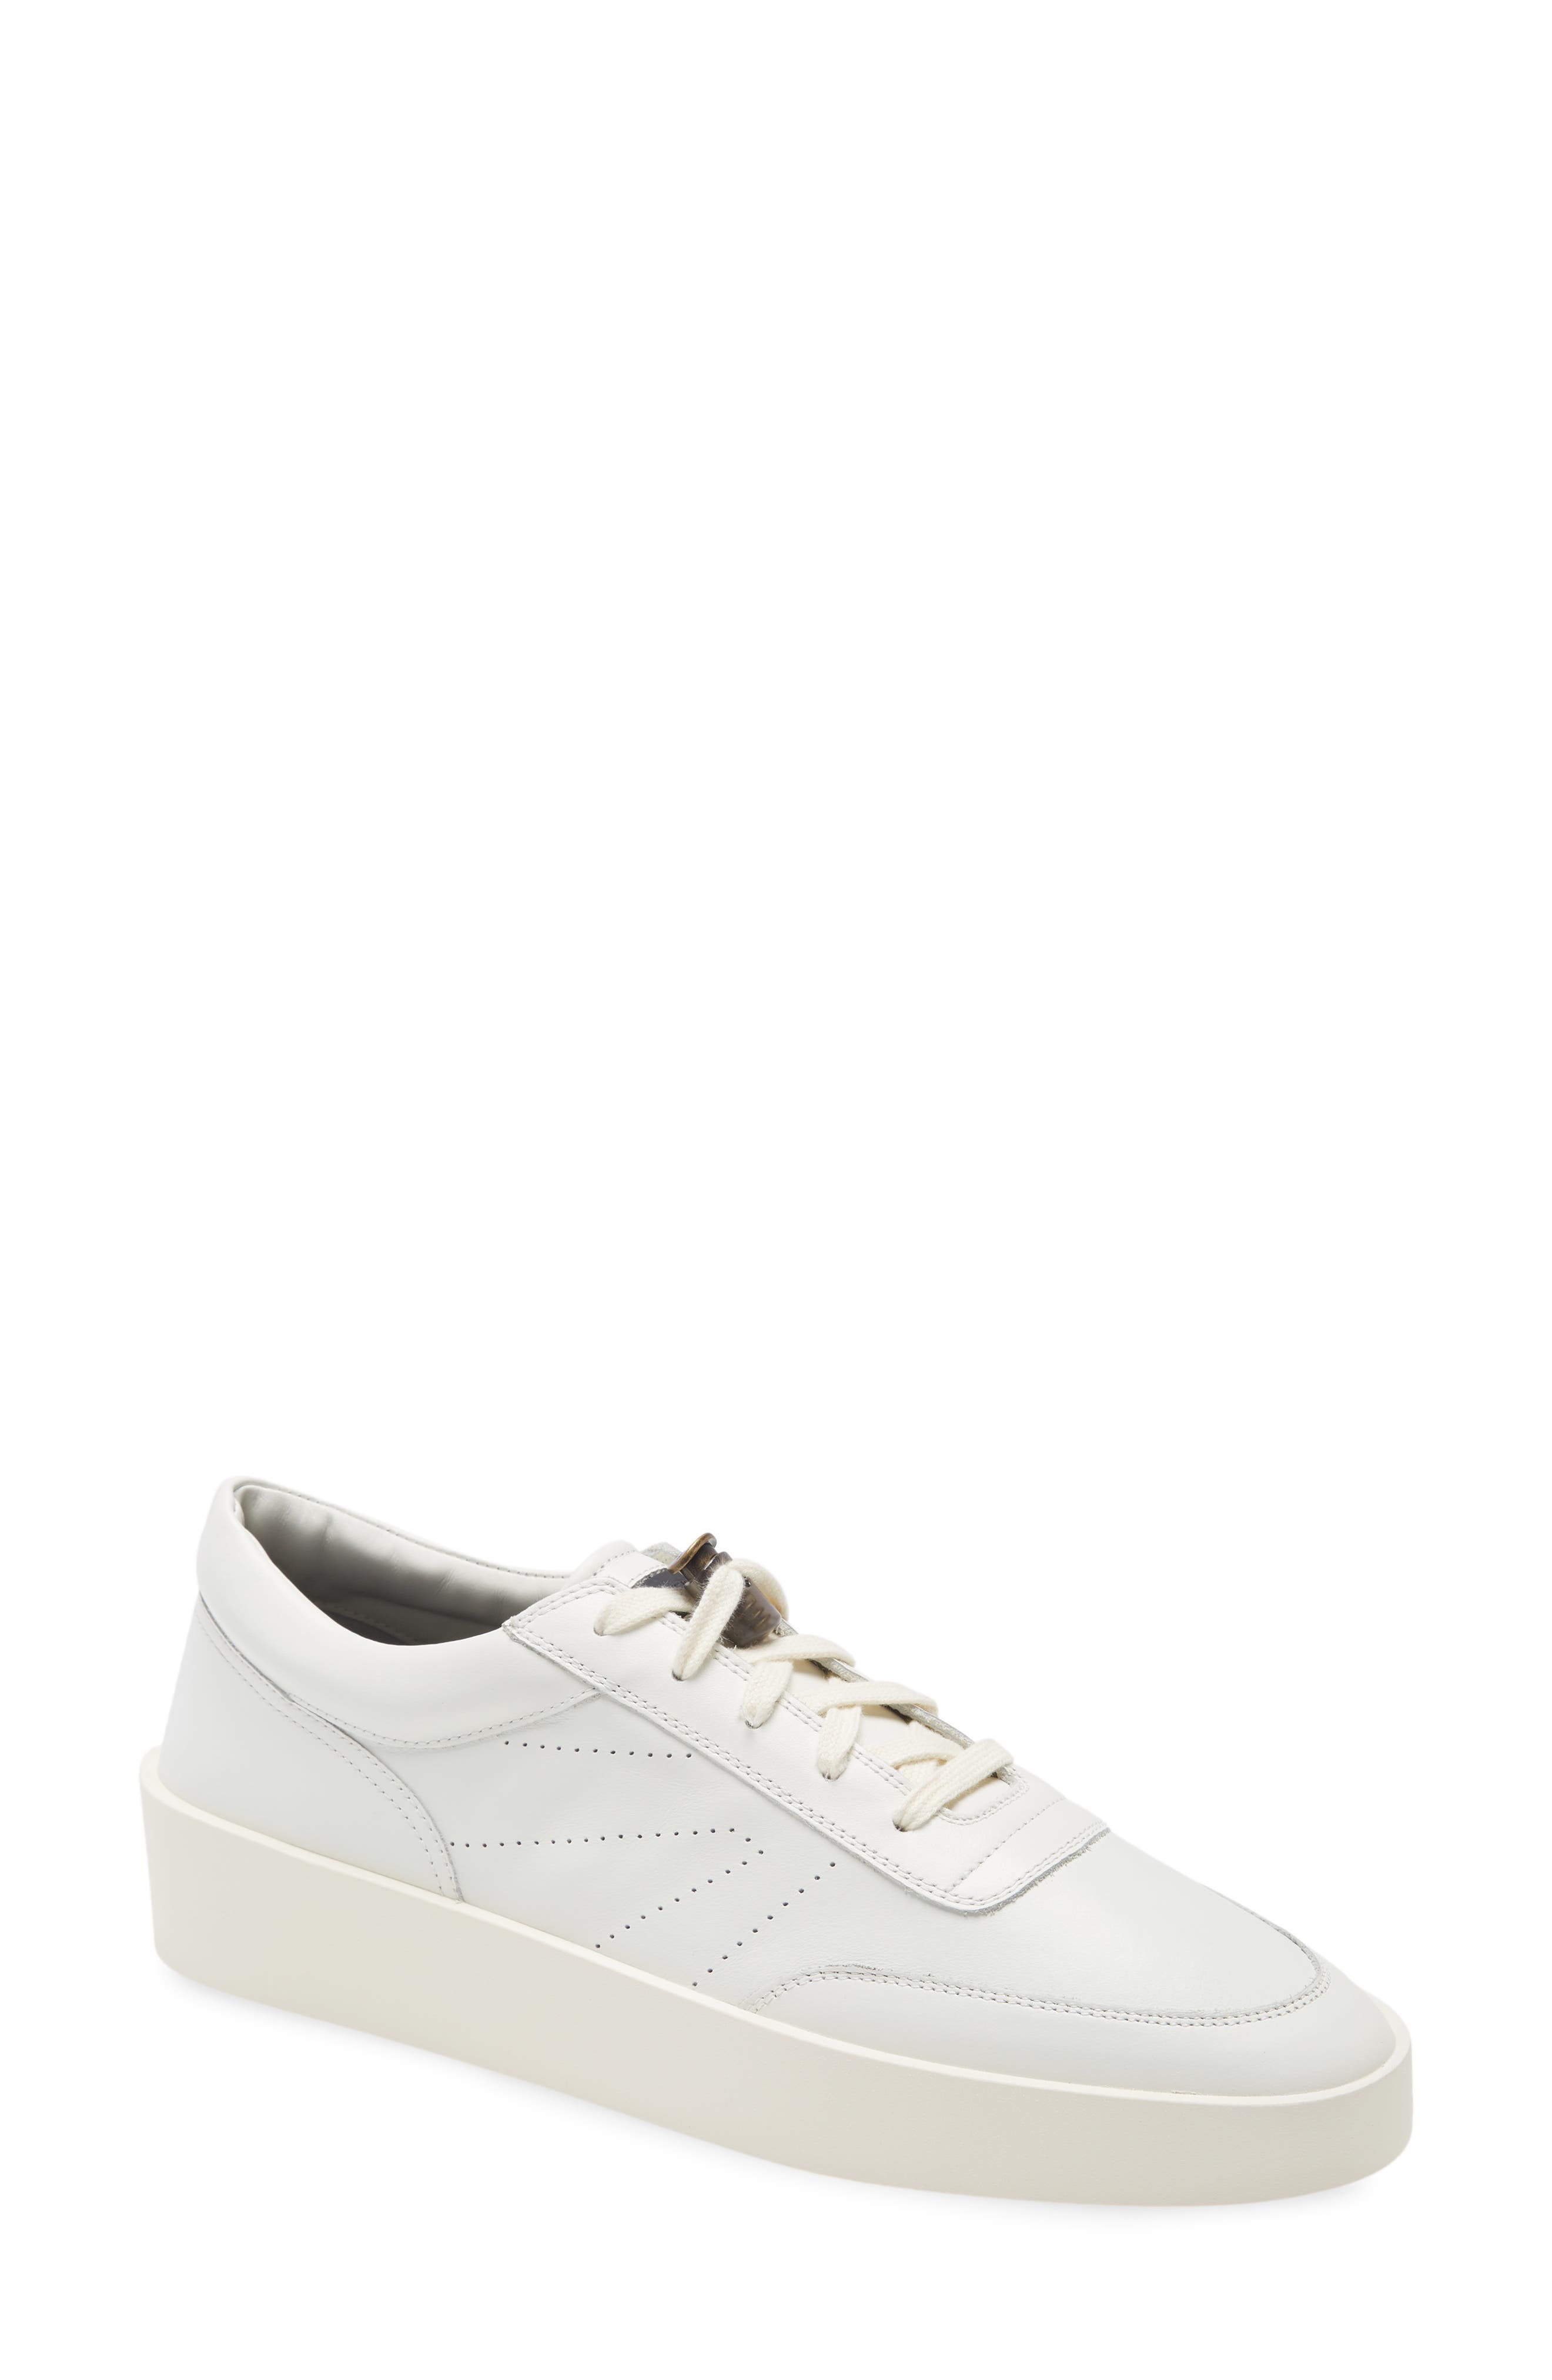 Fear of God Tennis Low Top Sneaker in Cream at Nordstrom, Size 8Us